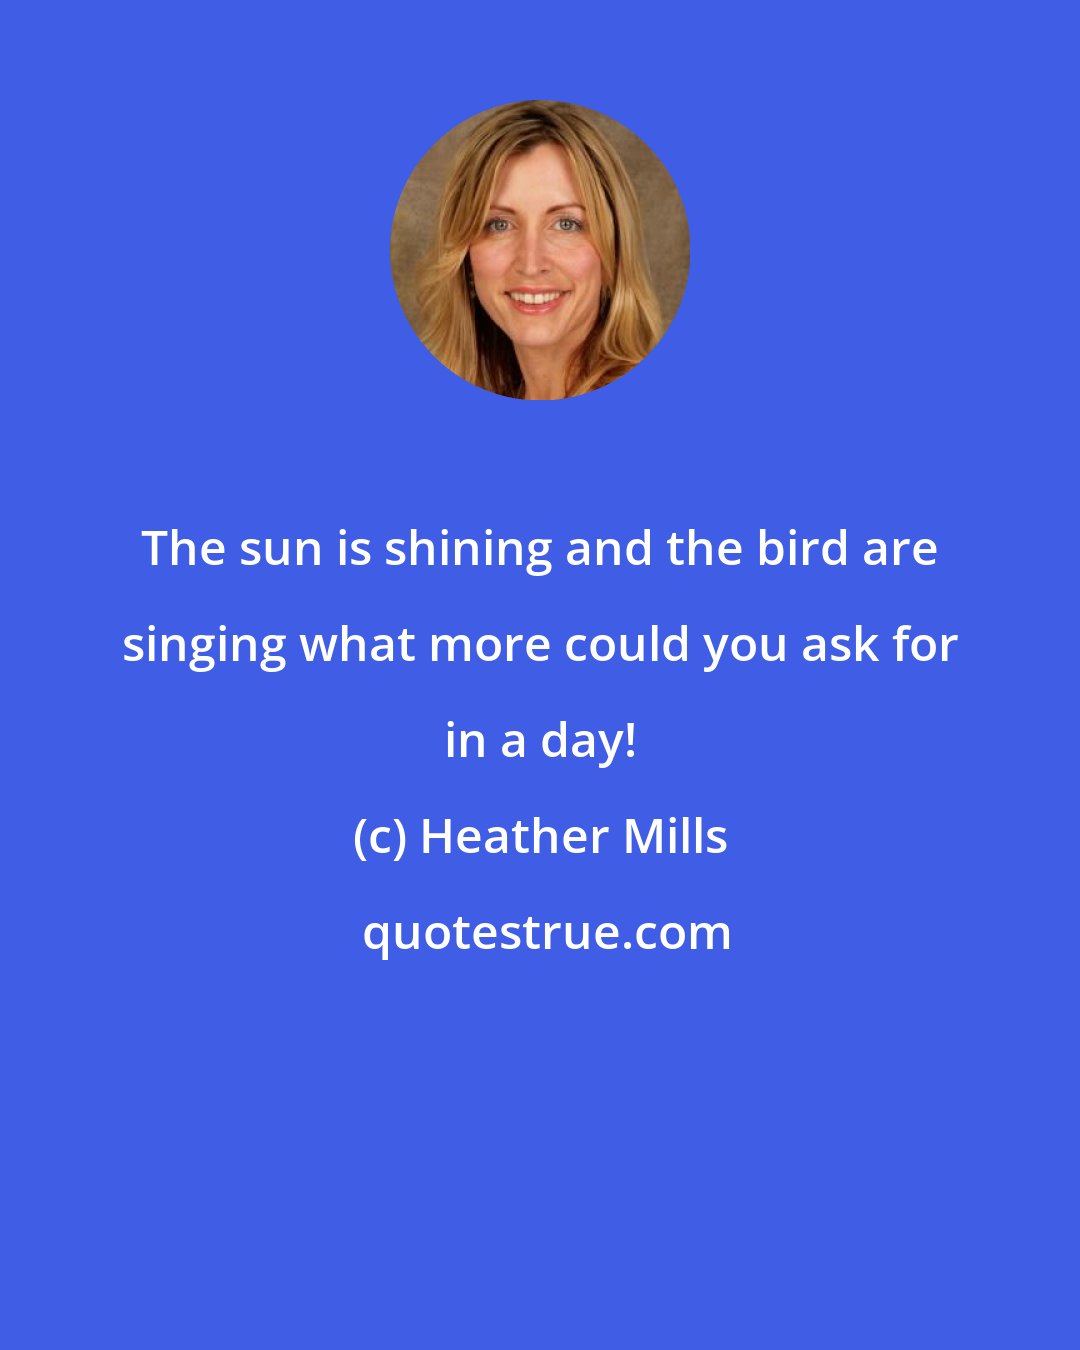 Heather Mills: The sun is shining and the bird are singing what more could you ask for in a day!